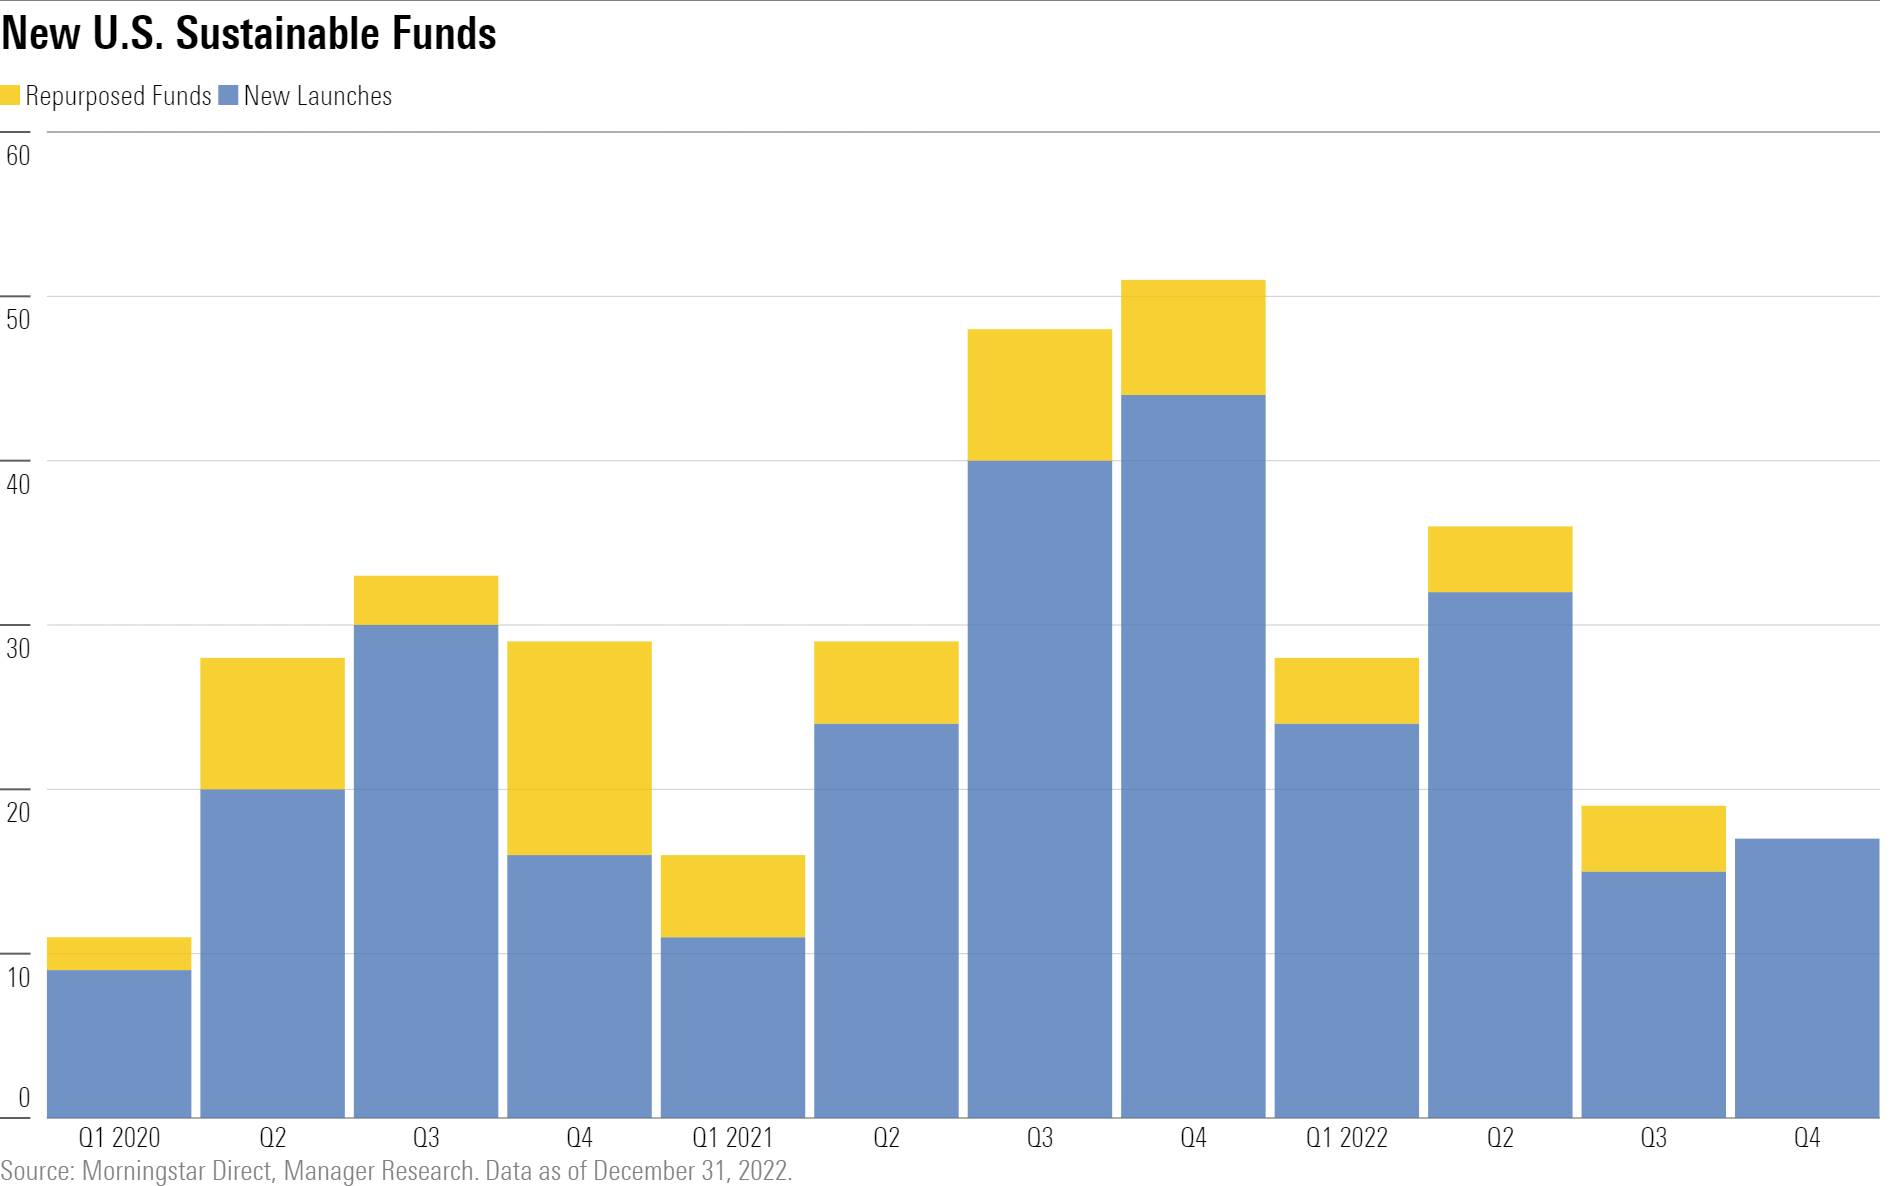 Stacked bar chart showing new launches and repurposed sustainable funds